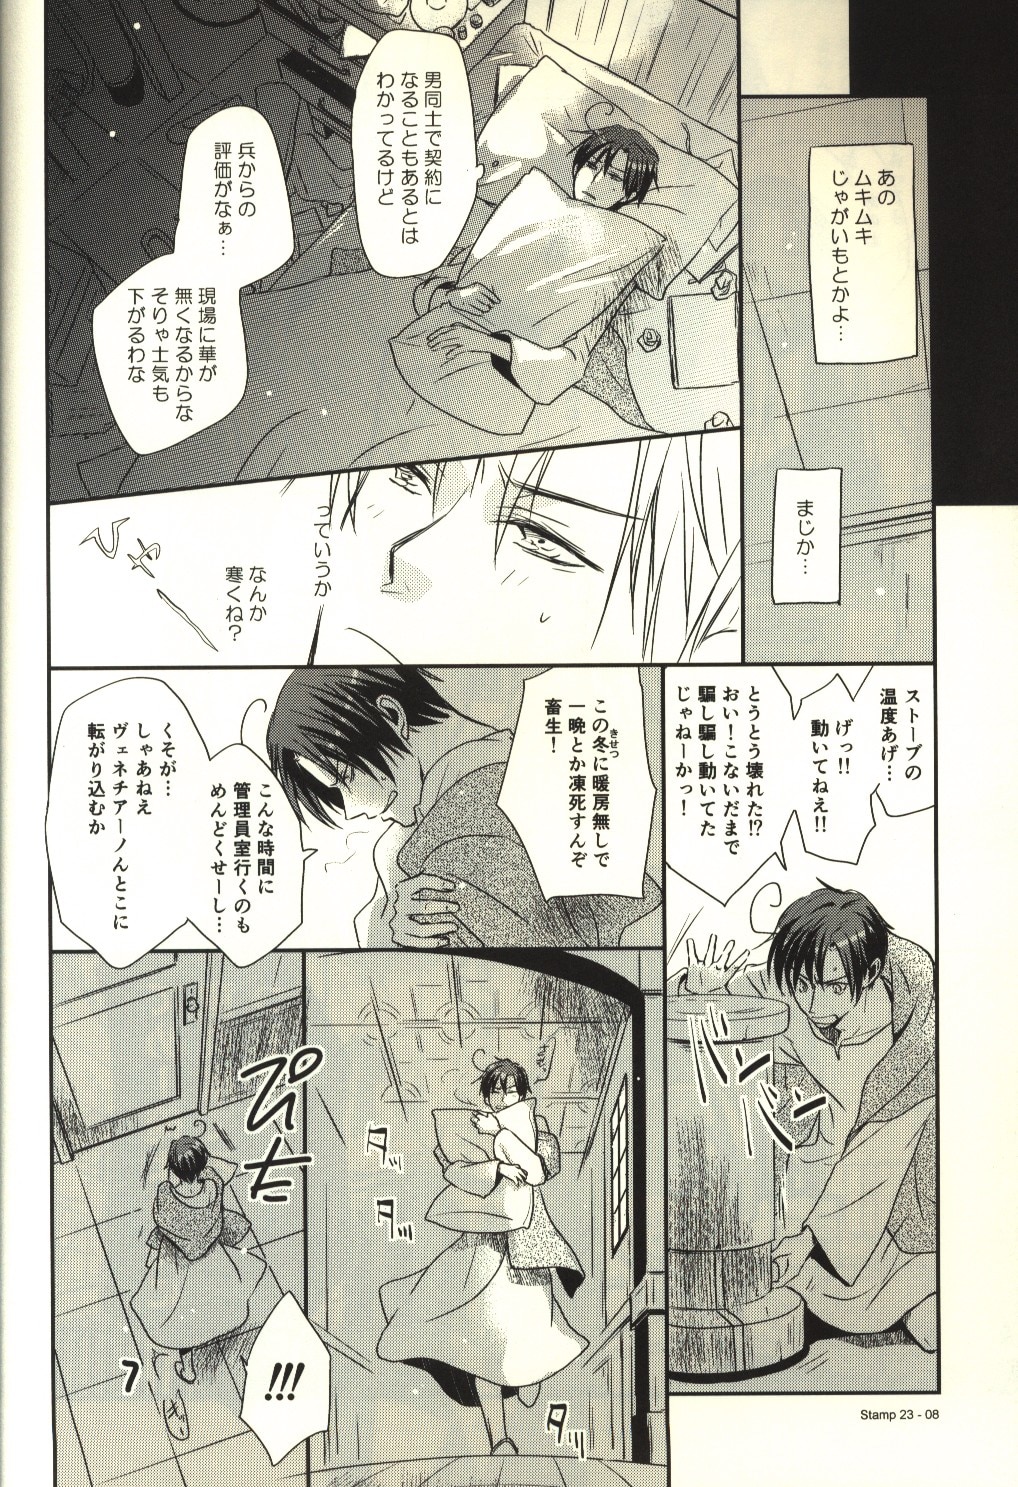 Doujinshi - Hetalia / Germany & Prussia & Southern Italy & Italy (Stamp 東南西北 23) / Receipt